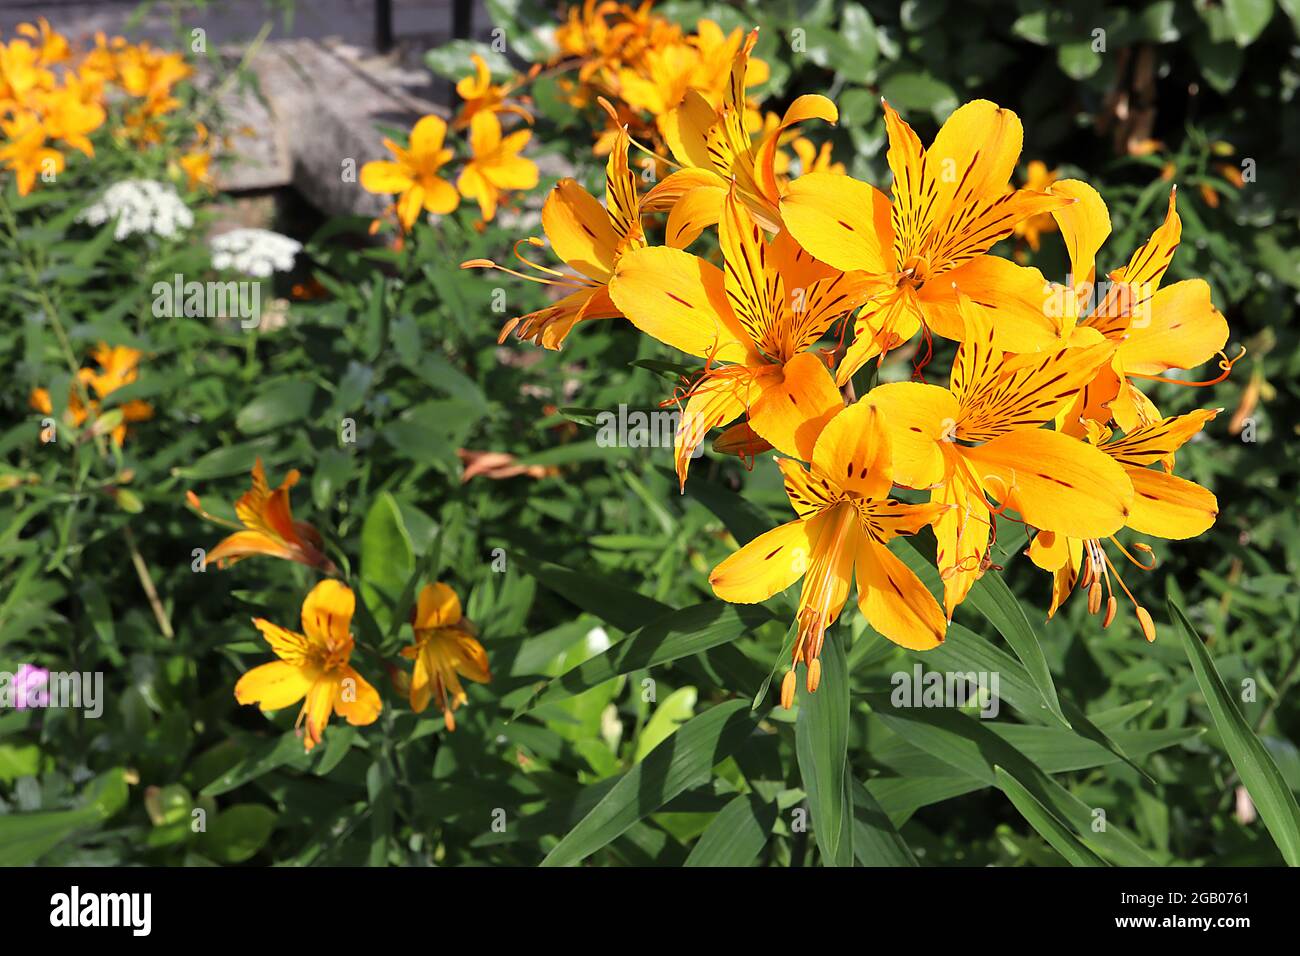 Alstroemeria Sussex Gold Peruvian lily ‘Sussex Gold’ – golden yellow funnel-shaped flowers with brown flecks,  June, England, UK Stock Photo